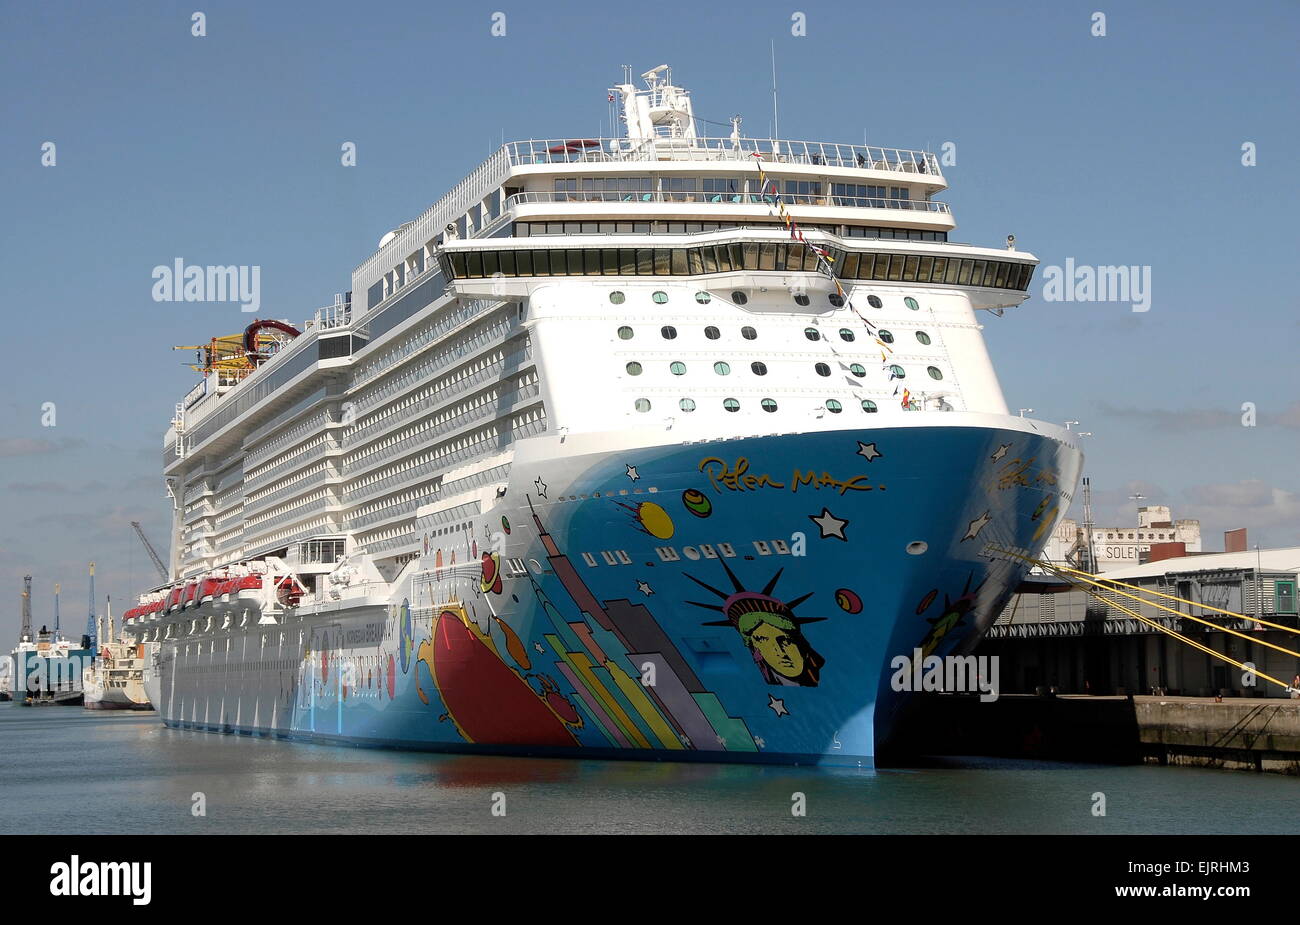 AJAXNETPHOTO. - 30TH APRIL, 2013. SOUTHAMPTON, ENGLAND. - POP ART CRUISE SHIP - NORWEGIAN CRUISE LINE'S NORWEGIAN BREAKAWAY, ITS HULL DECORATED WITH A DESIGN BY ARTIST PETER MAX, PREPARES FOR MAIDEN VOYAGE. PHOTO; TONY HOLLAND/AJAX REF:STR3673 Stock Photo